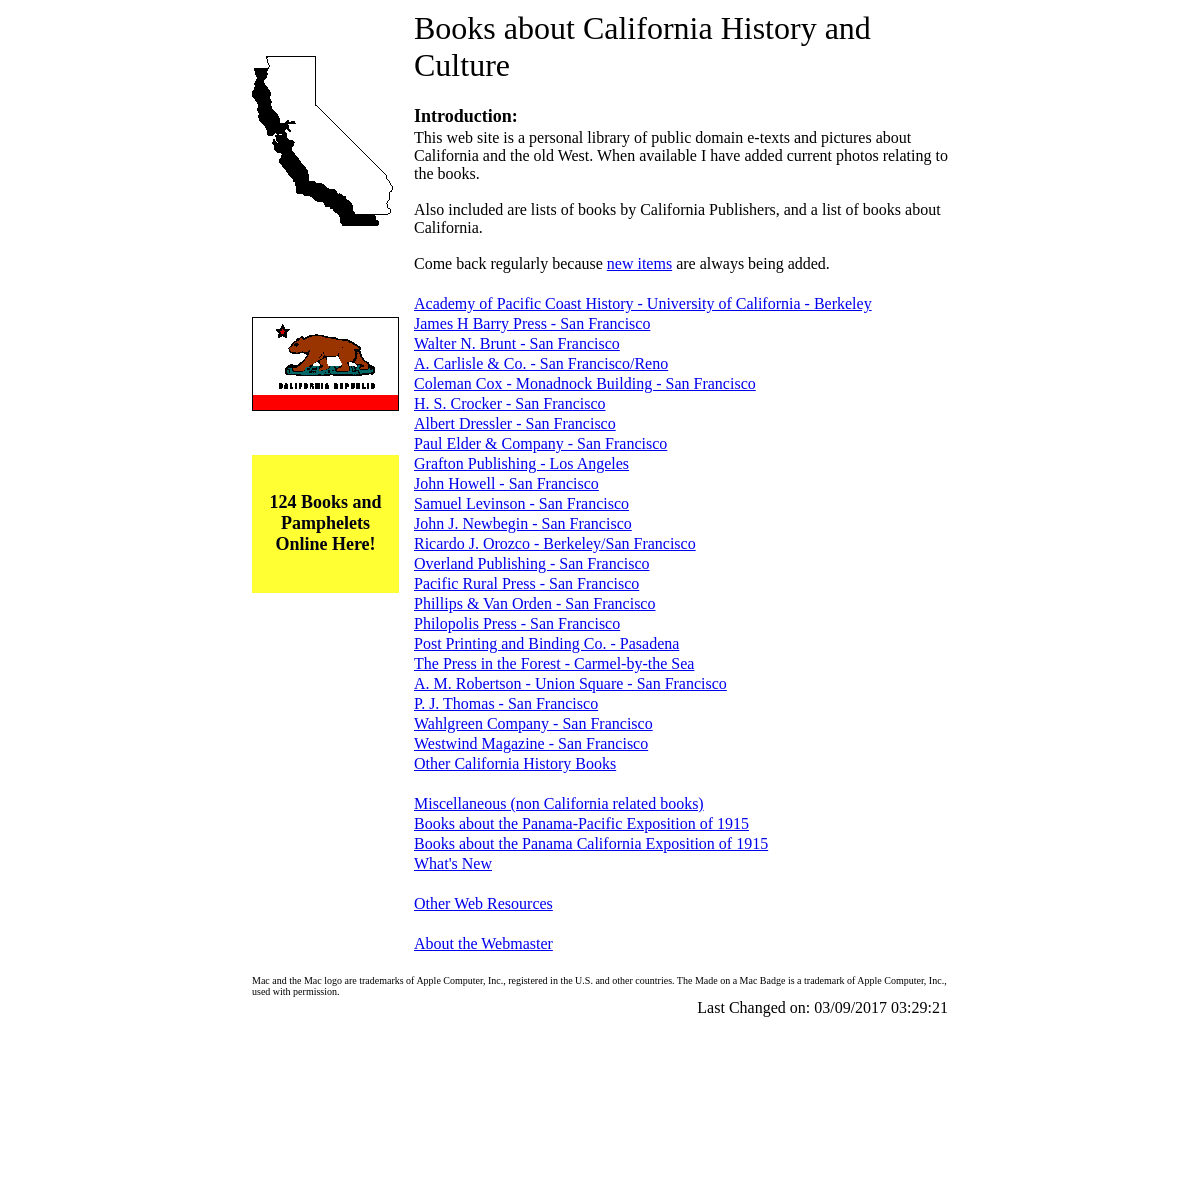 A complete backup of books-about-california.com